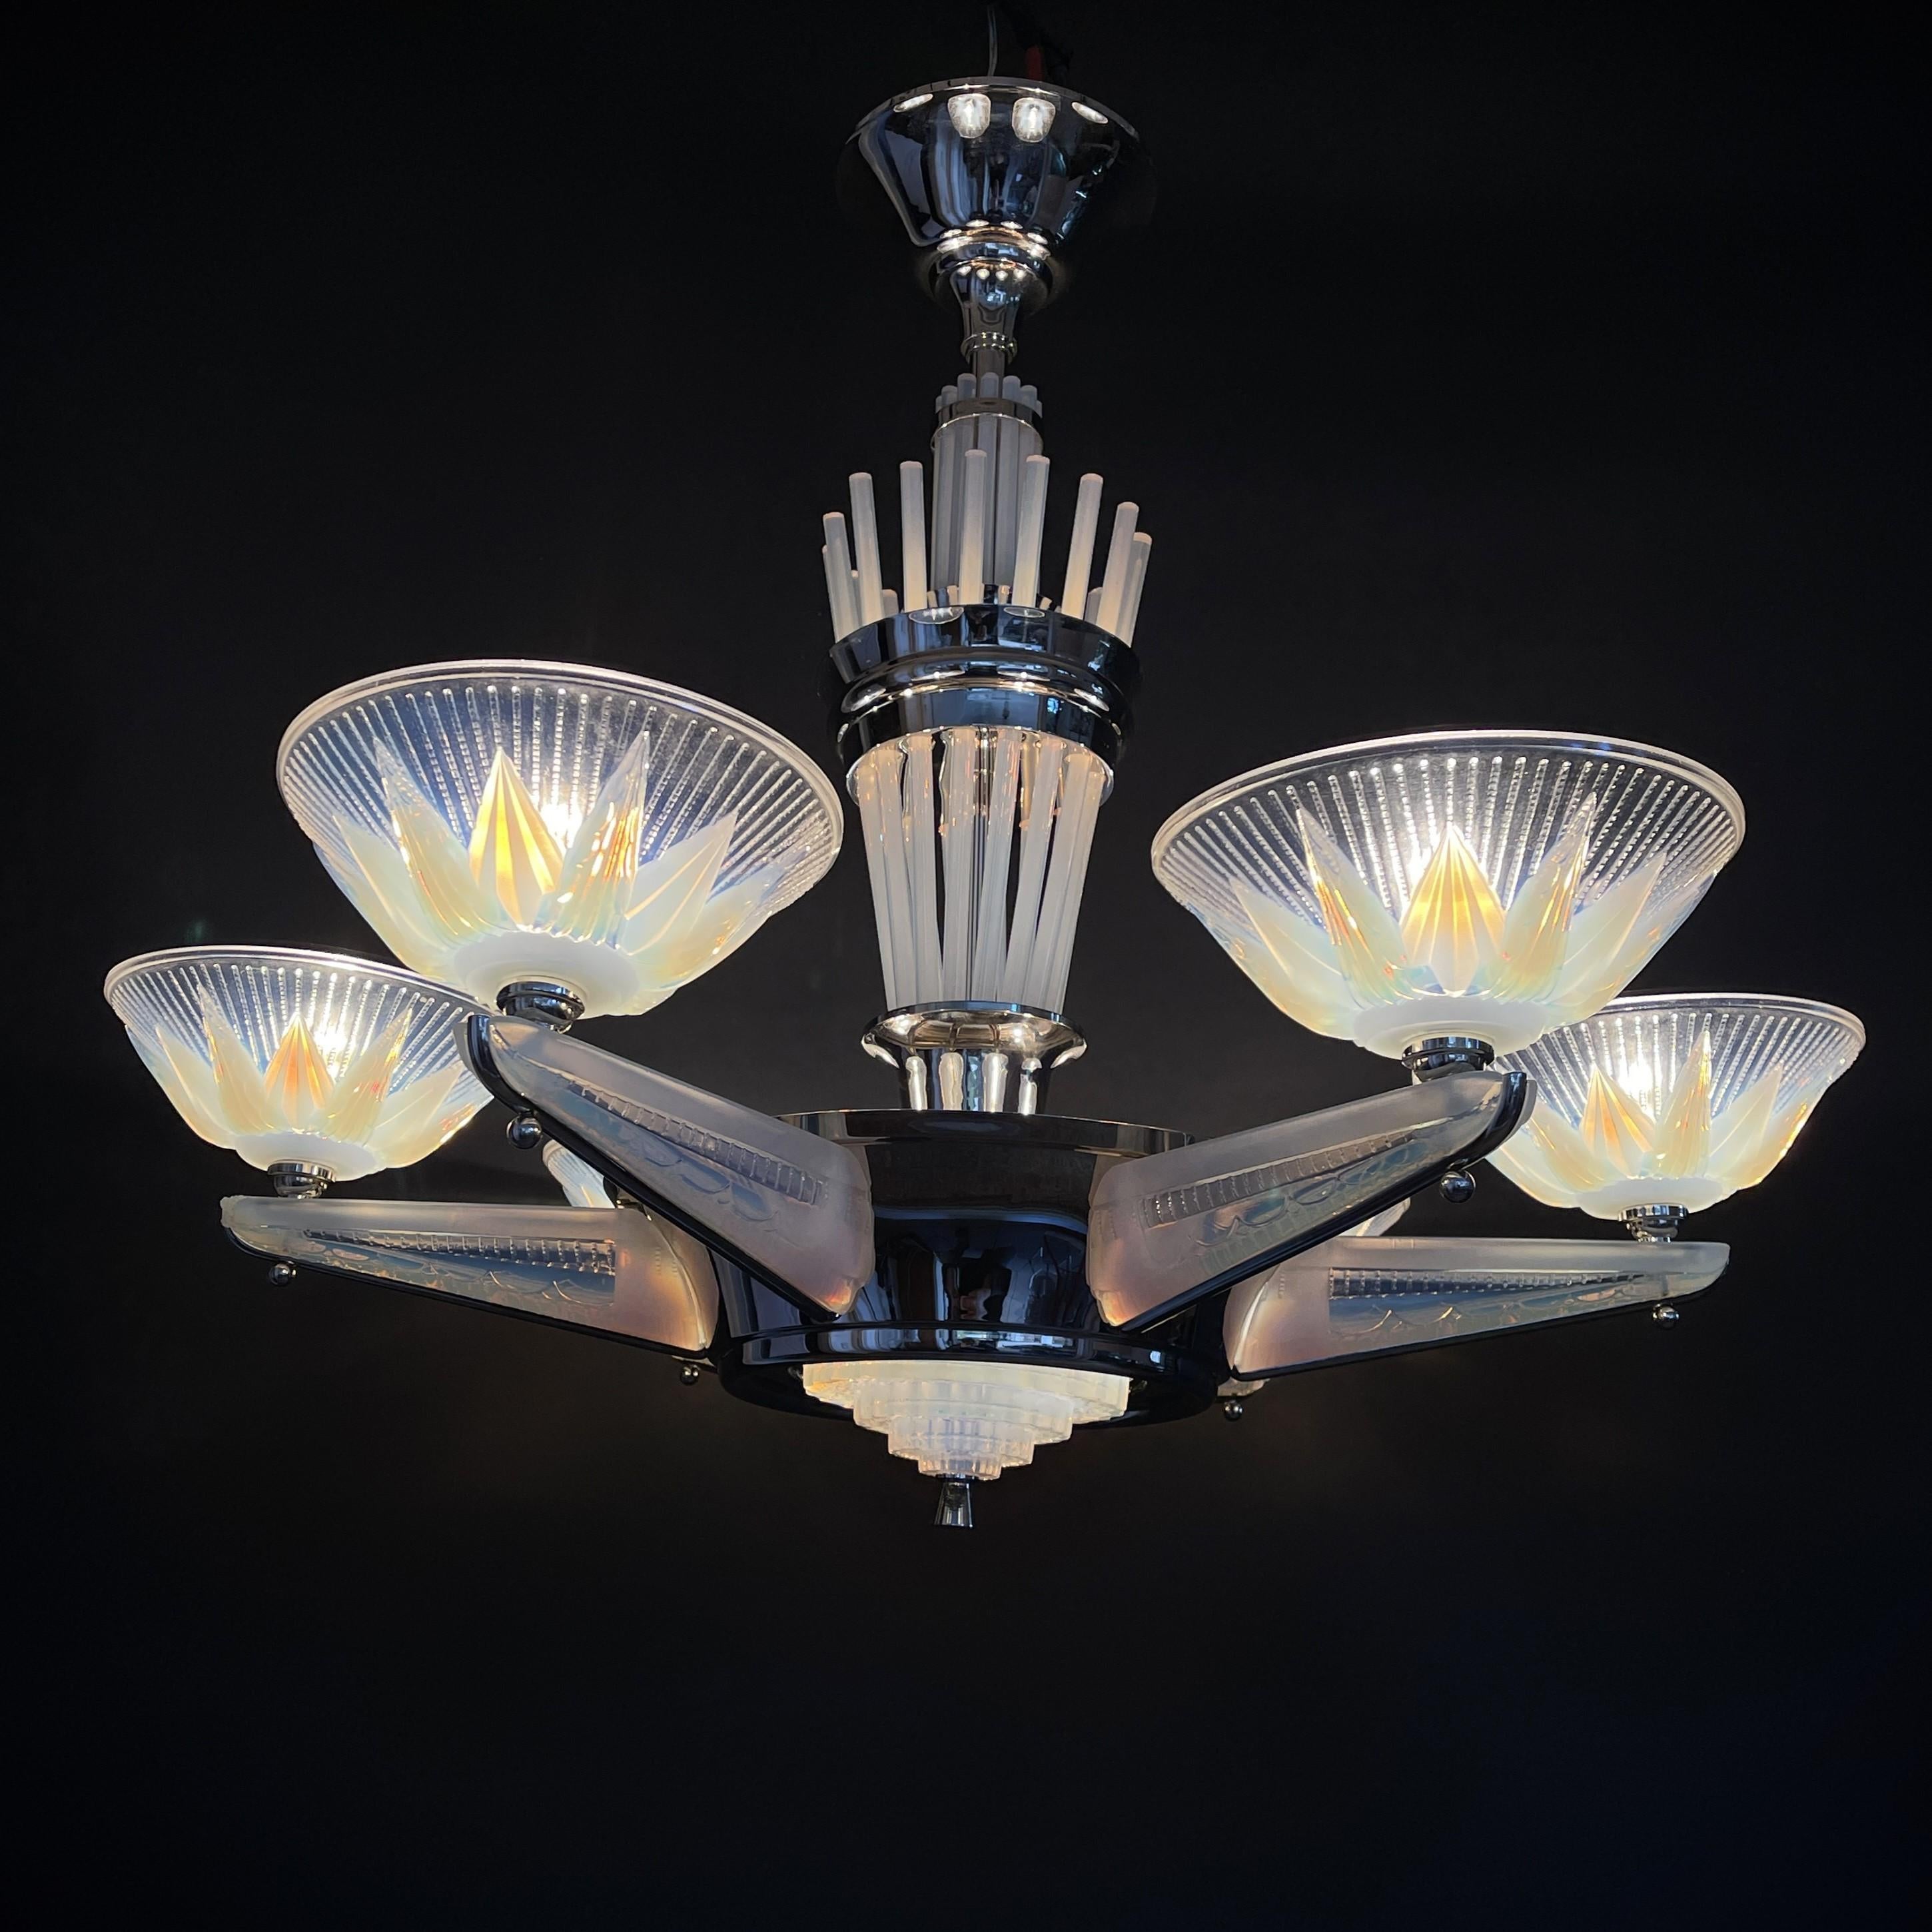 French Art Deco star lamp chandelier from Petitot & Ezan, 1930s For Sale